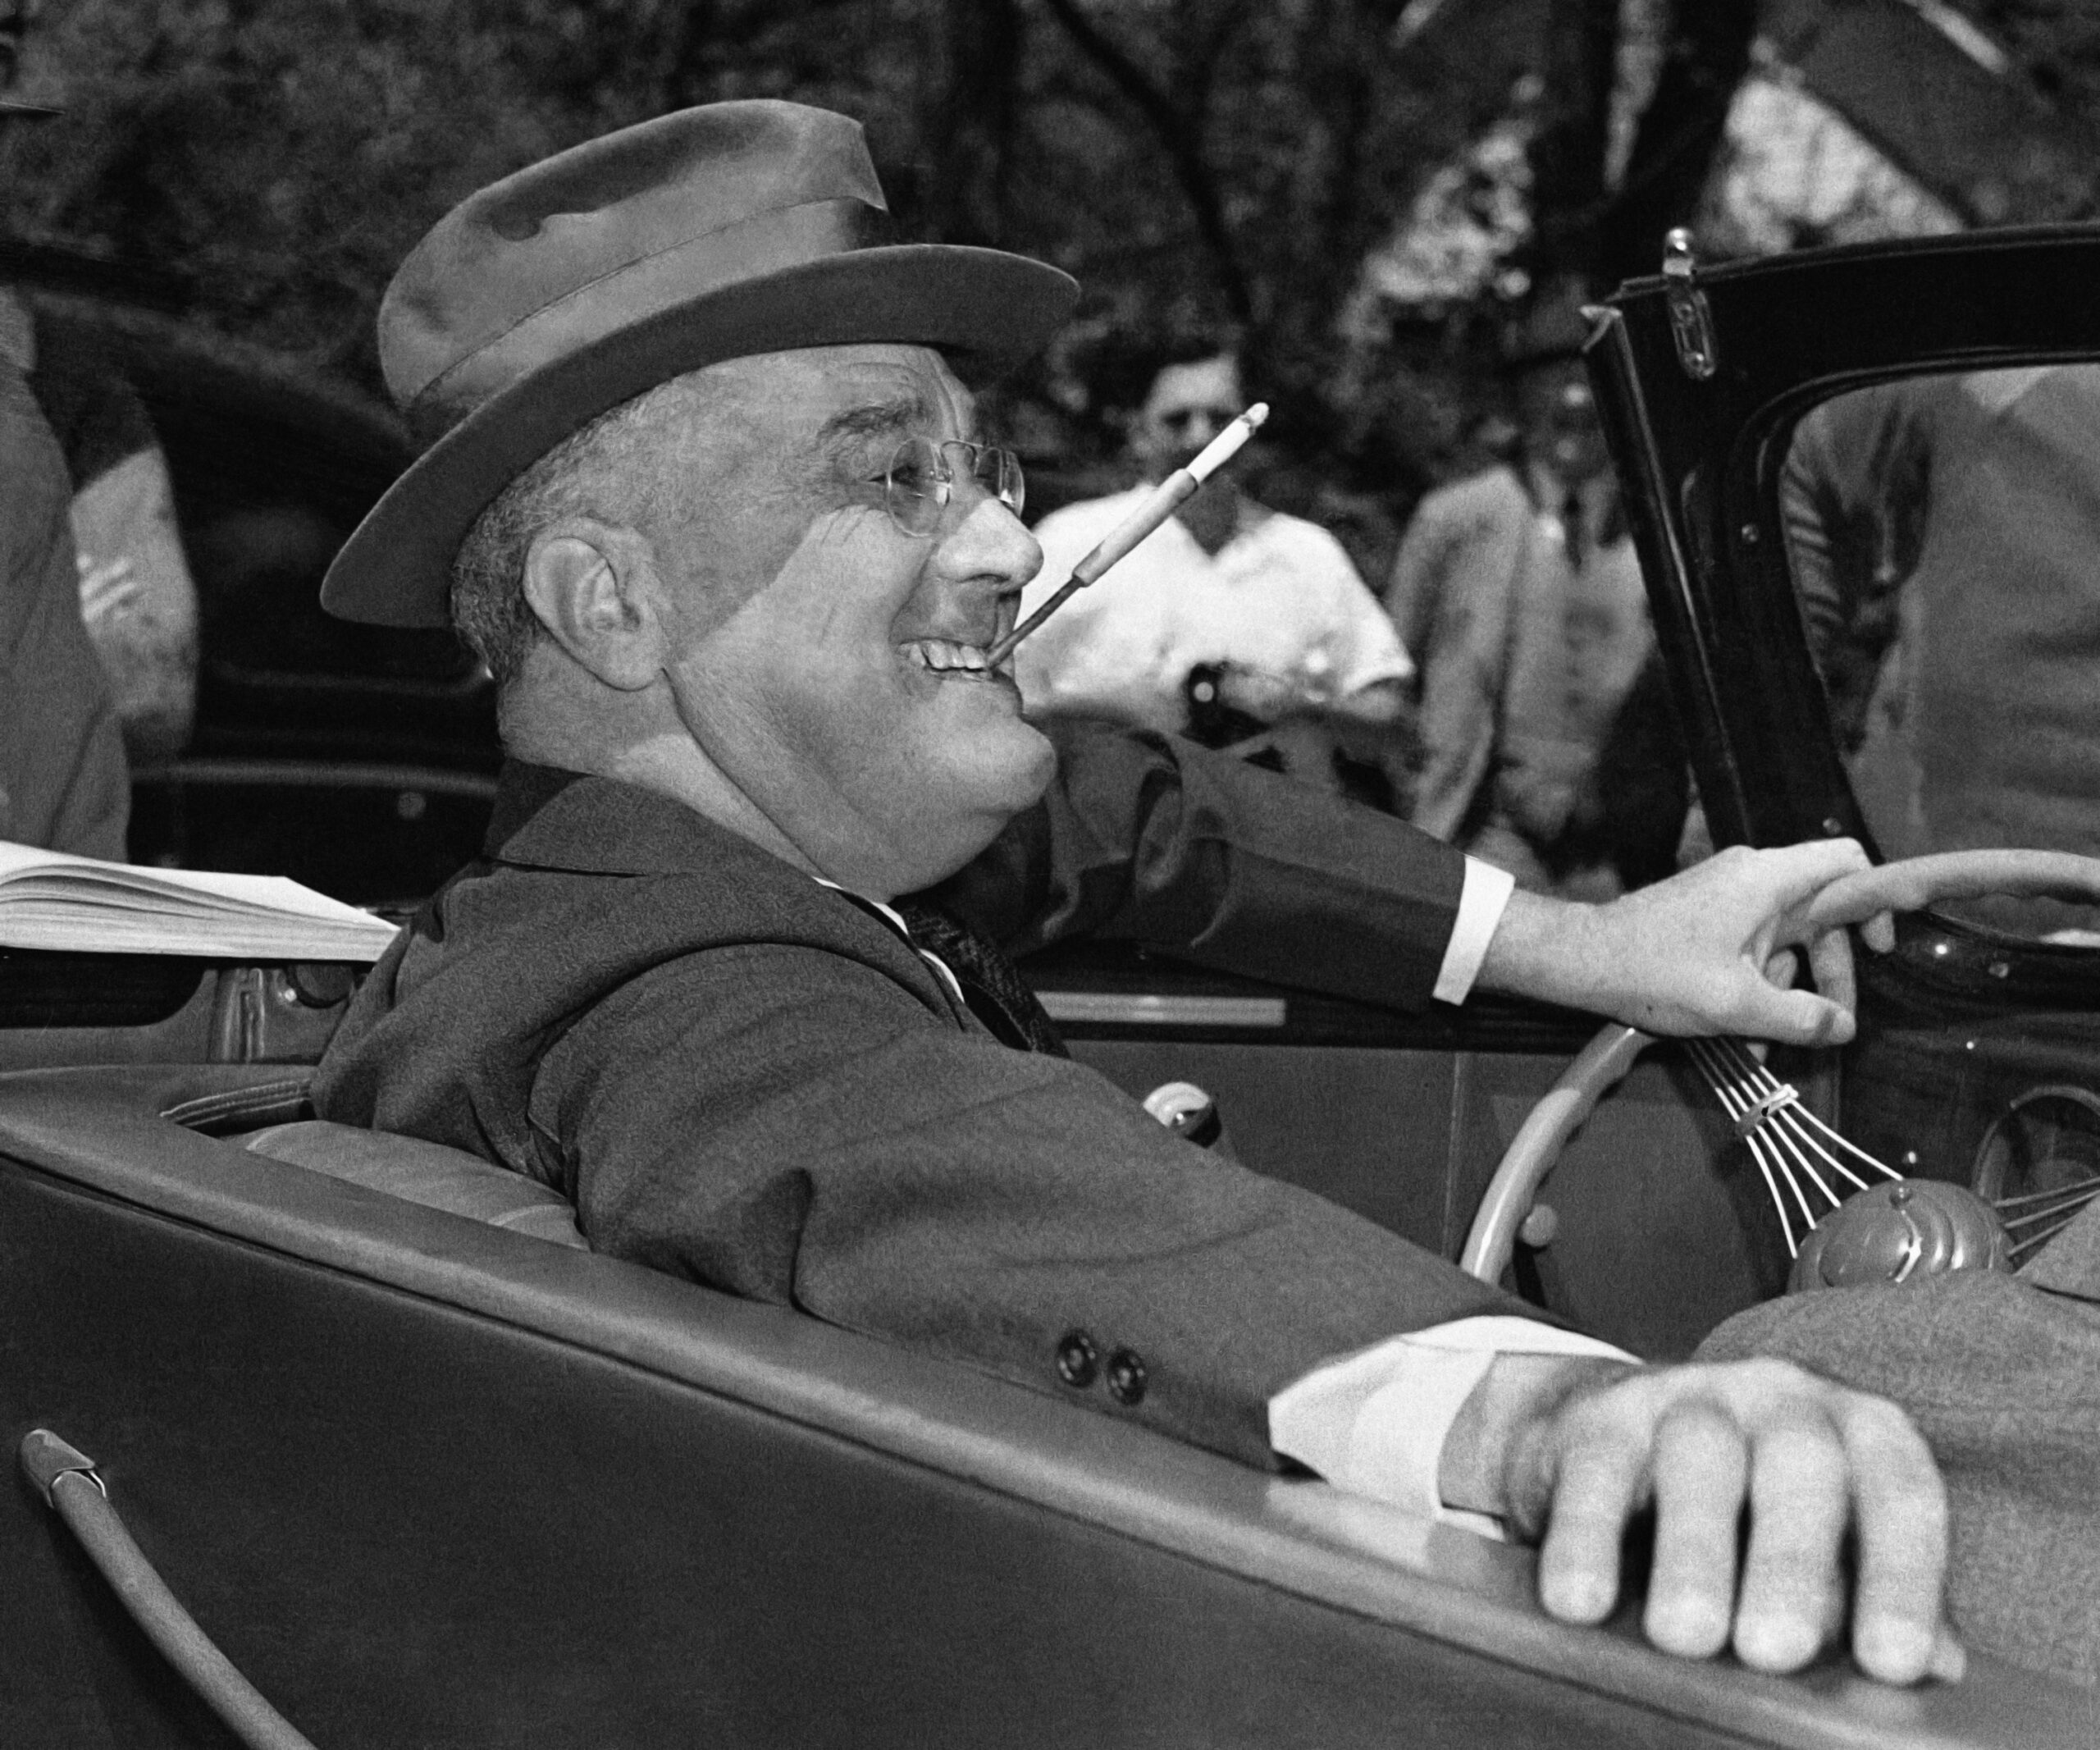 President Franklin D. Roosevelt sits at the wheel of his car in Warm Springs, Georgia, April 1939, fielding questions at an outdoor news conference. (AP Photo)